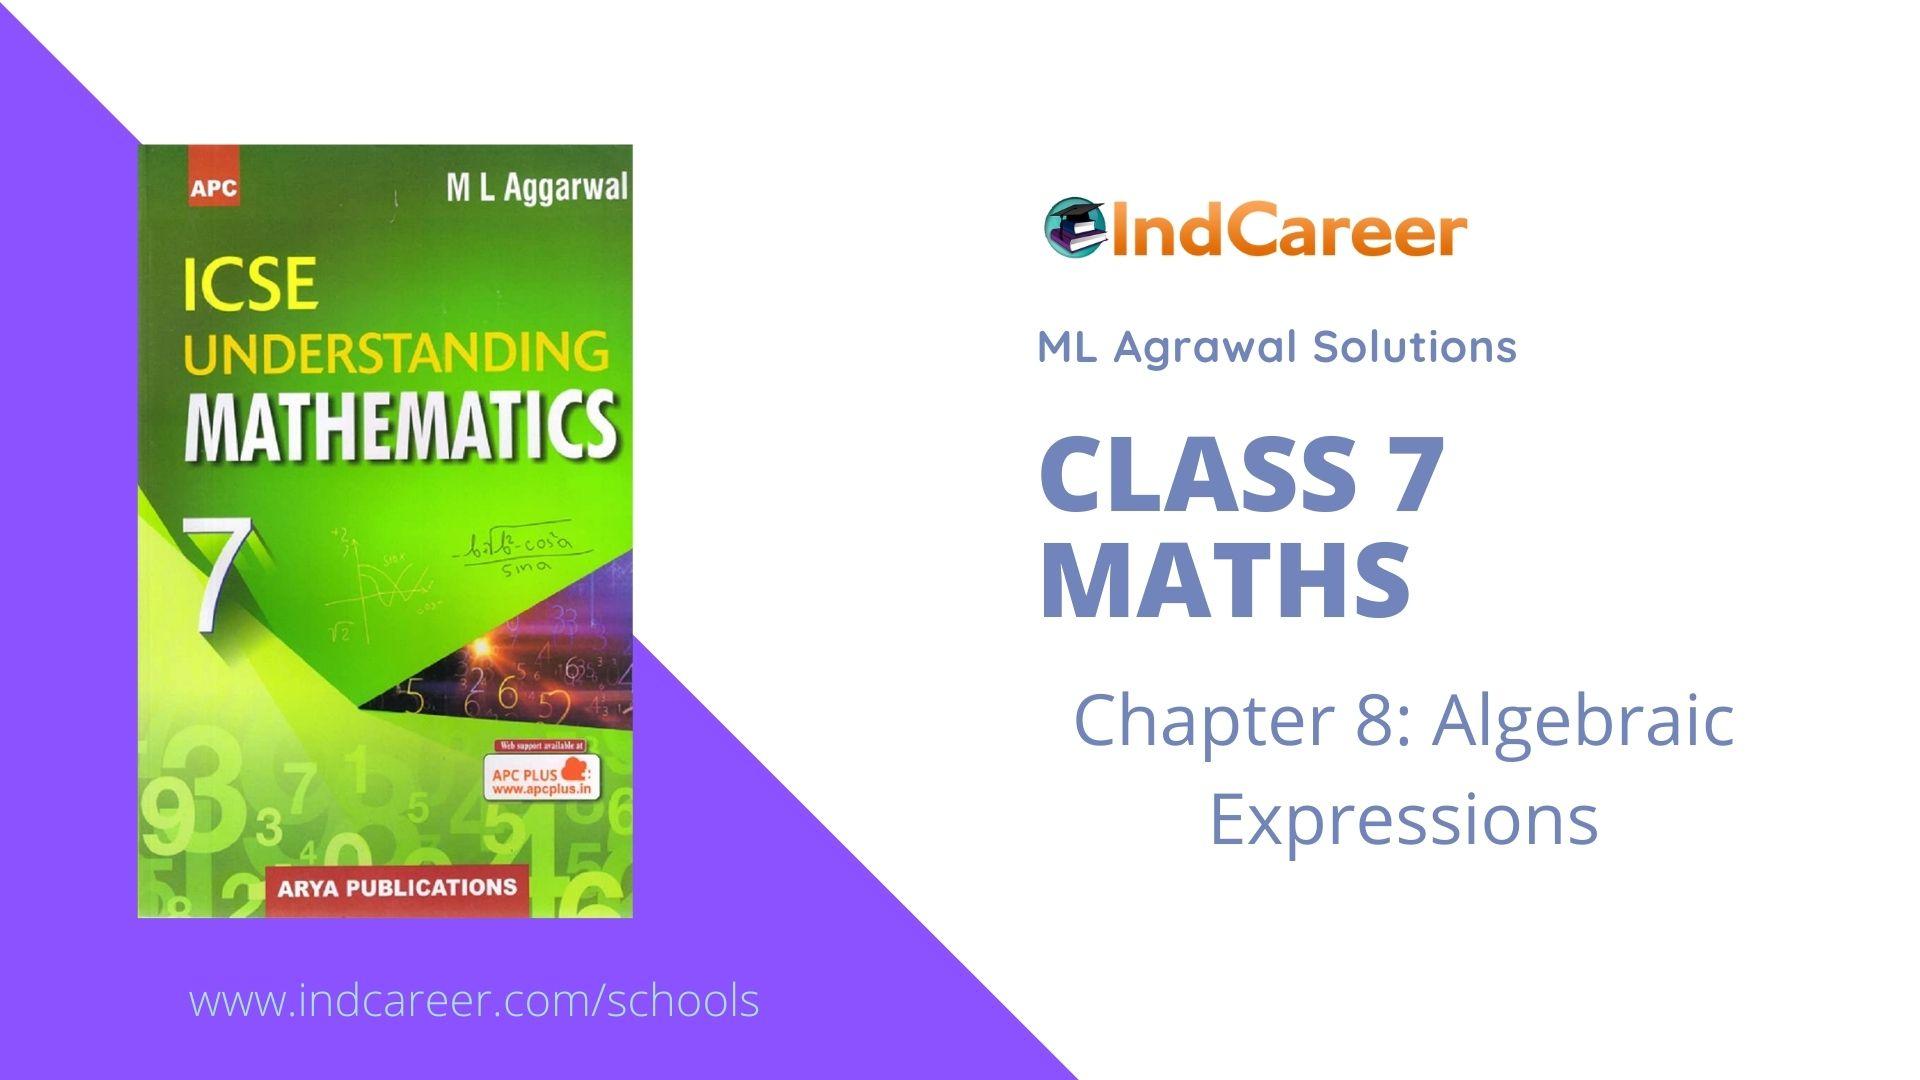 ml-aggarwal-solutions-for-class-7-maths-chapter-8-indcareer-schools